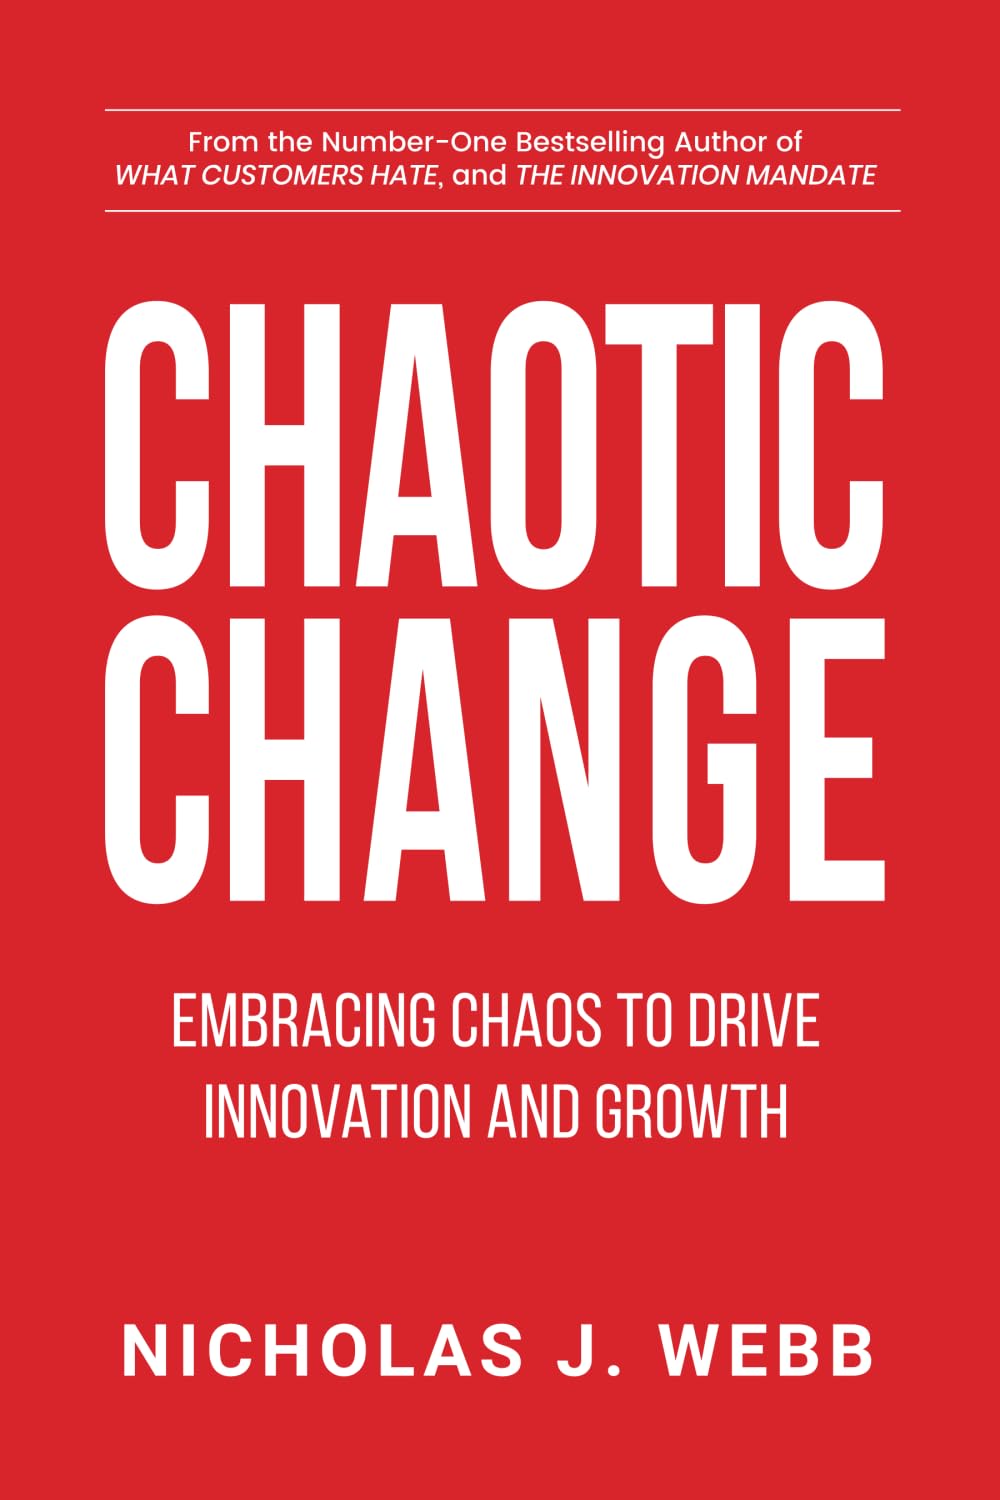  Chaotic Change: Embracing Chaos to Drive Innovation and Growth